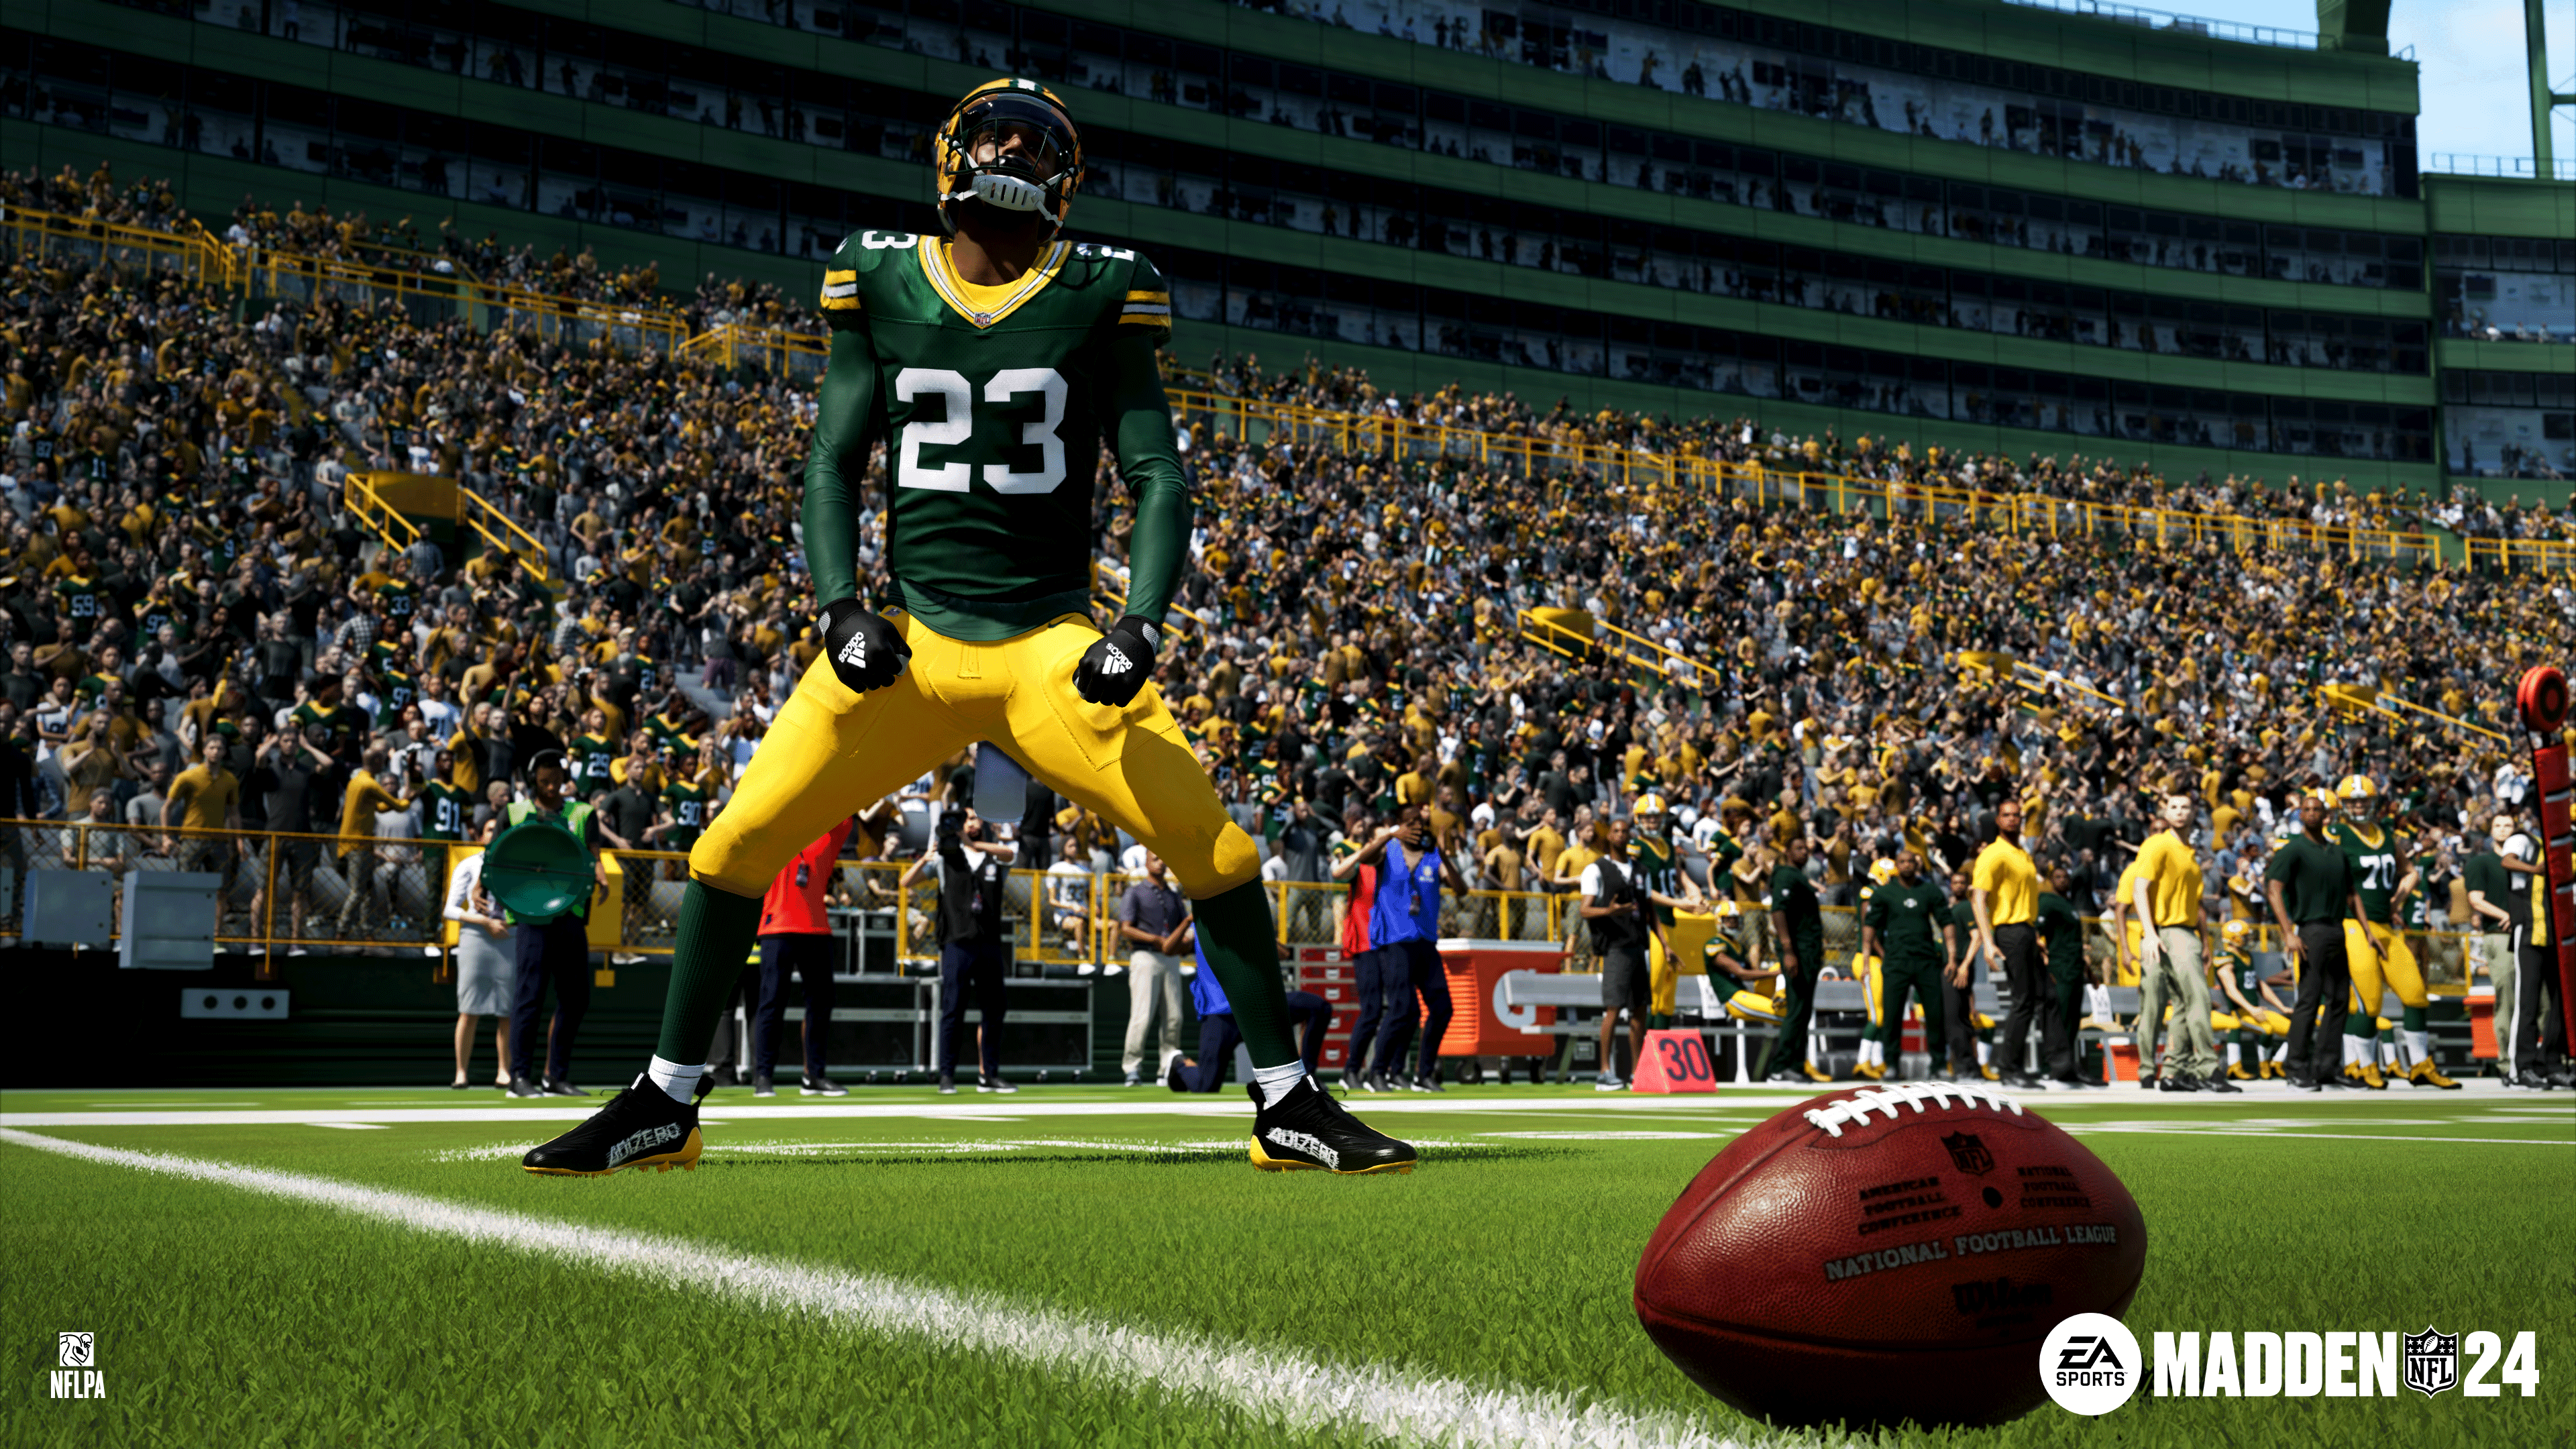 Meet the NFL star behind the new Madden 24 gameplay